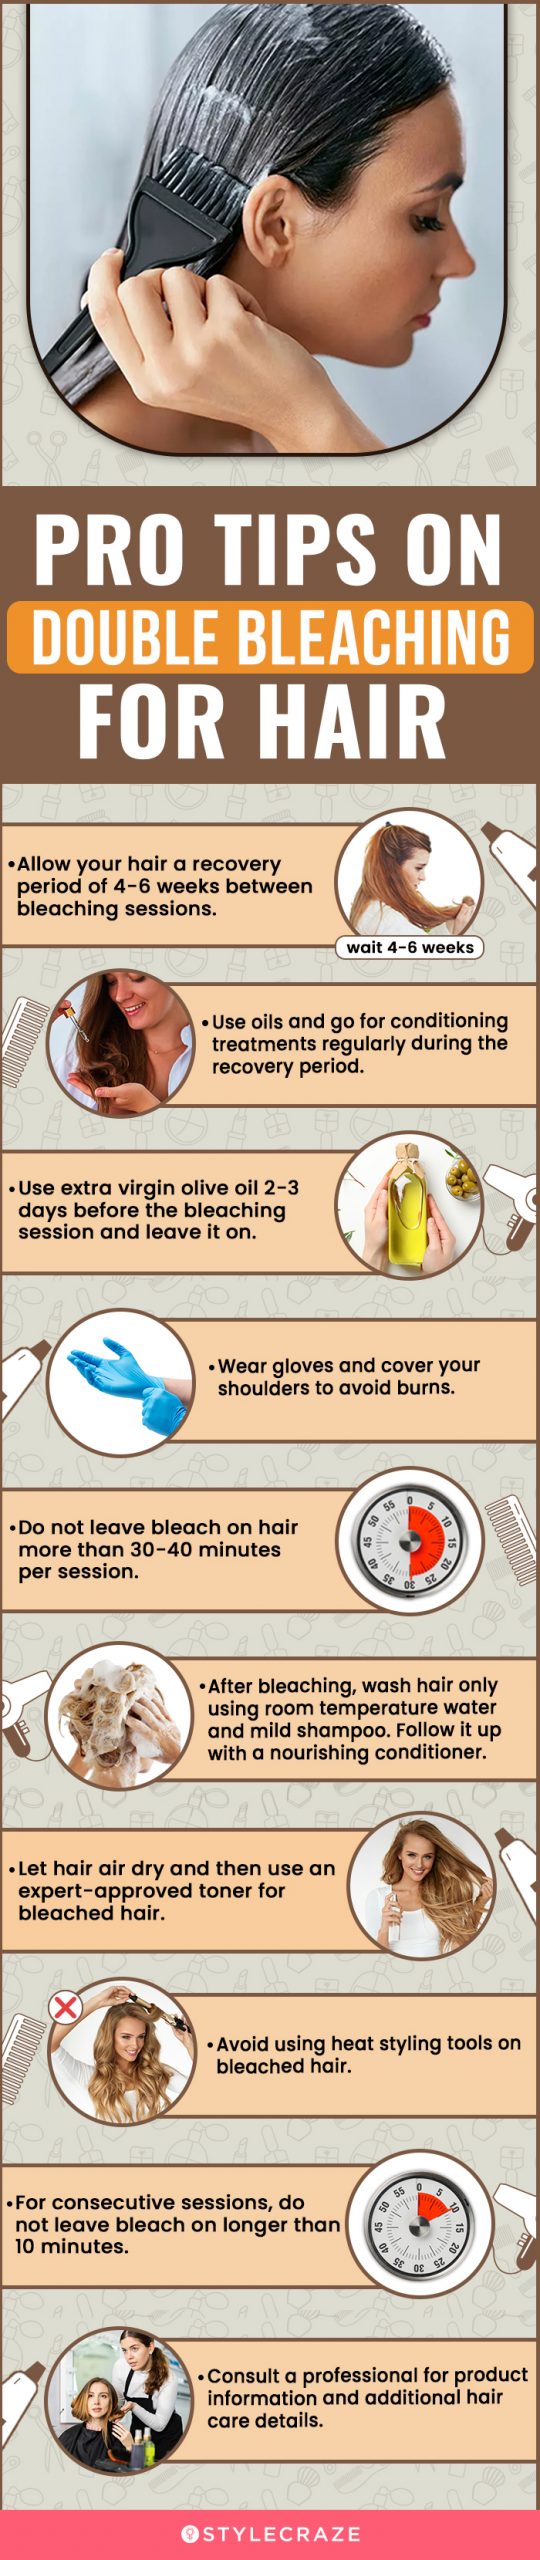 pro tips on double bleaching for hair (infographic)